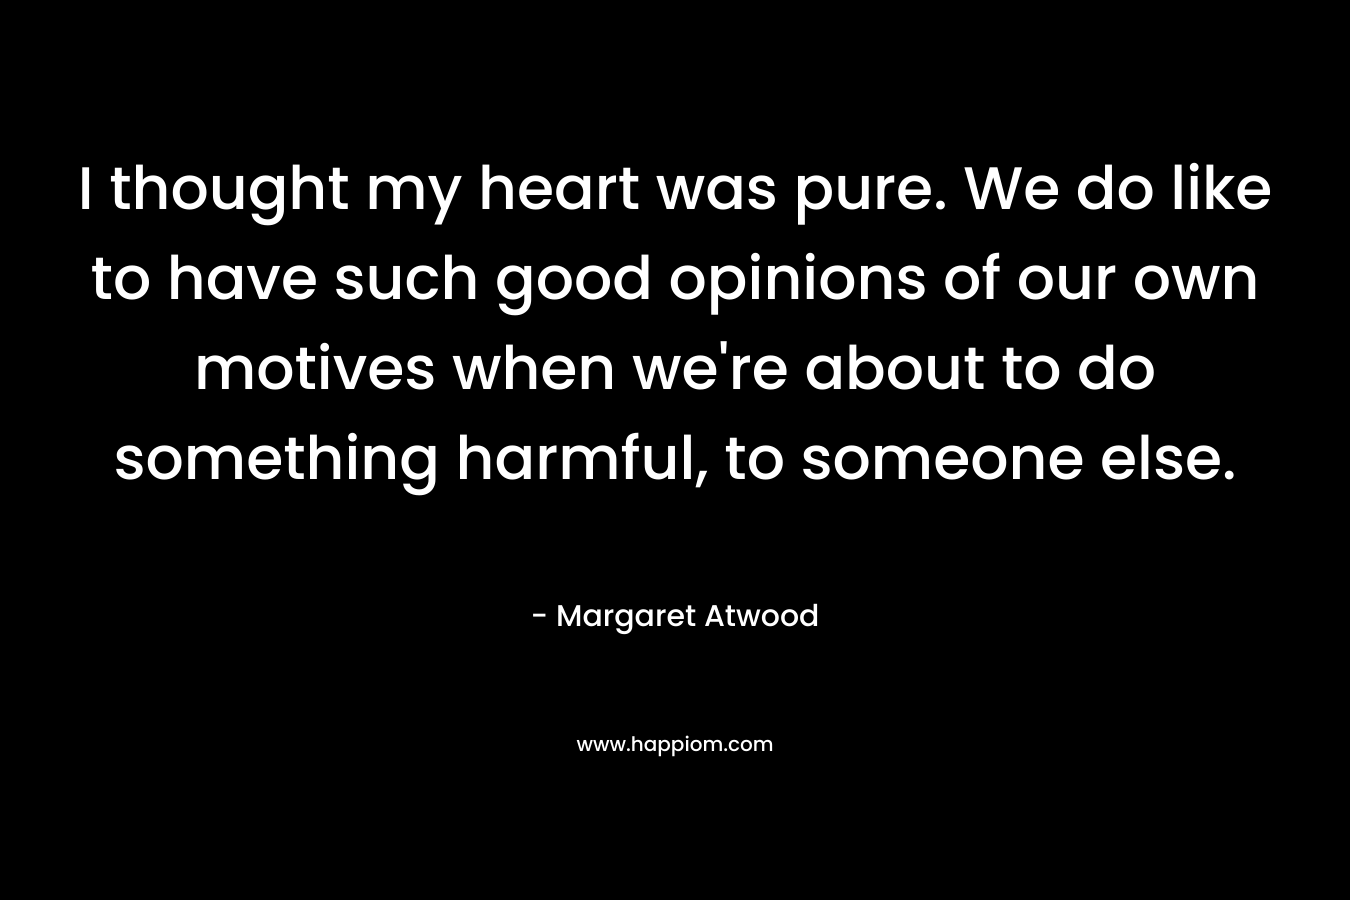 I thought my heart was pure. We do like to have such good opinions of our own motives when we're about to do something harmful, to someone else.